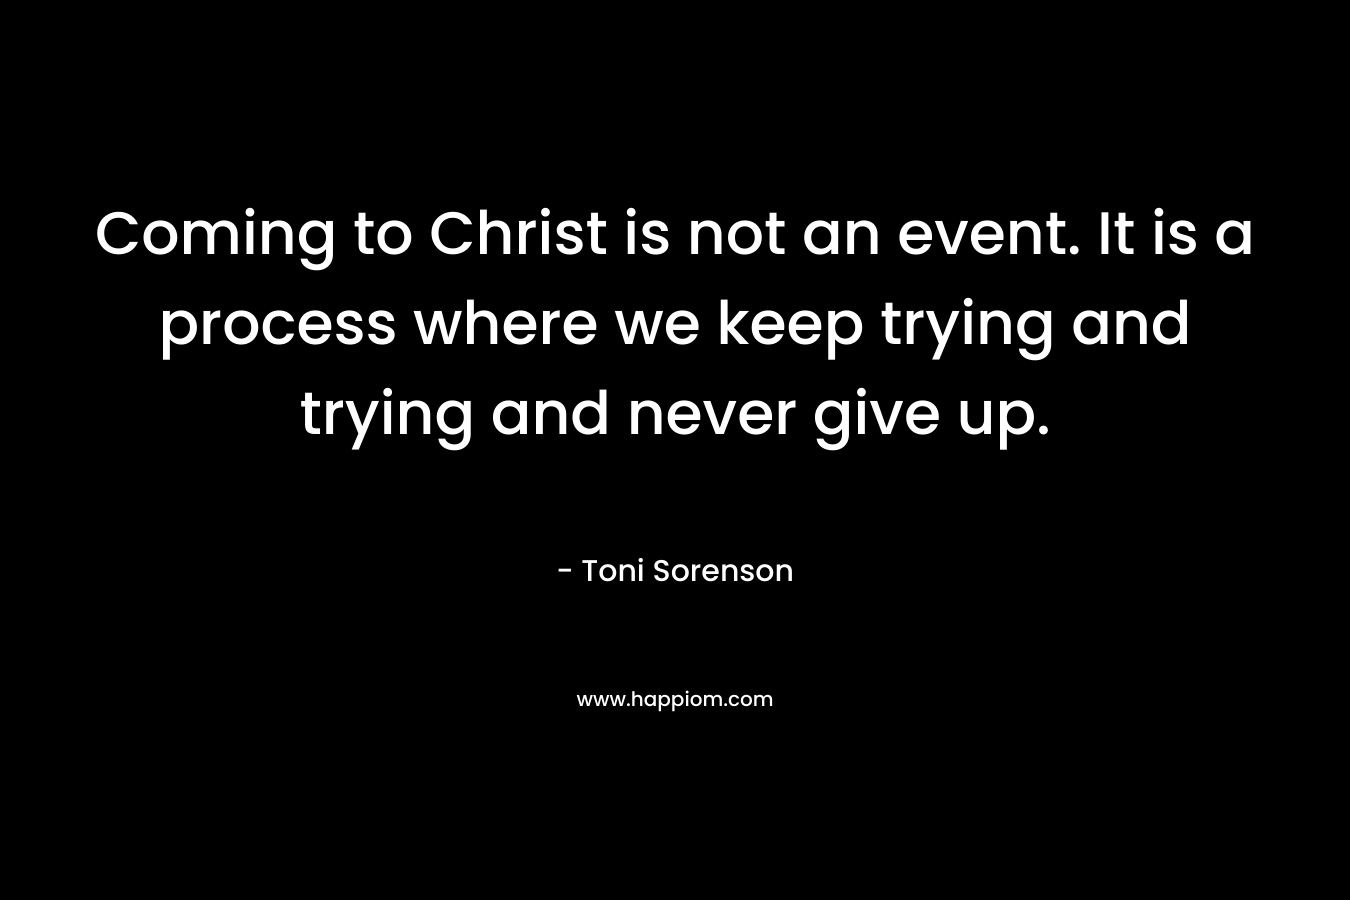 Coming to Christ is not an event. It is a process where we keep trying and trying and never give up. – Toni Sorenson